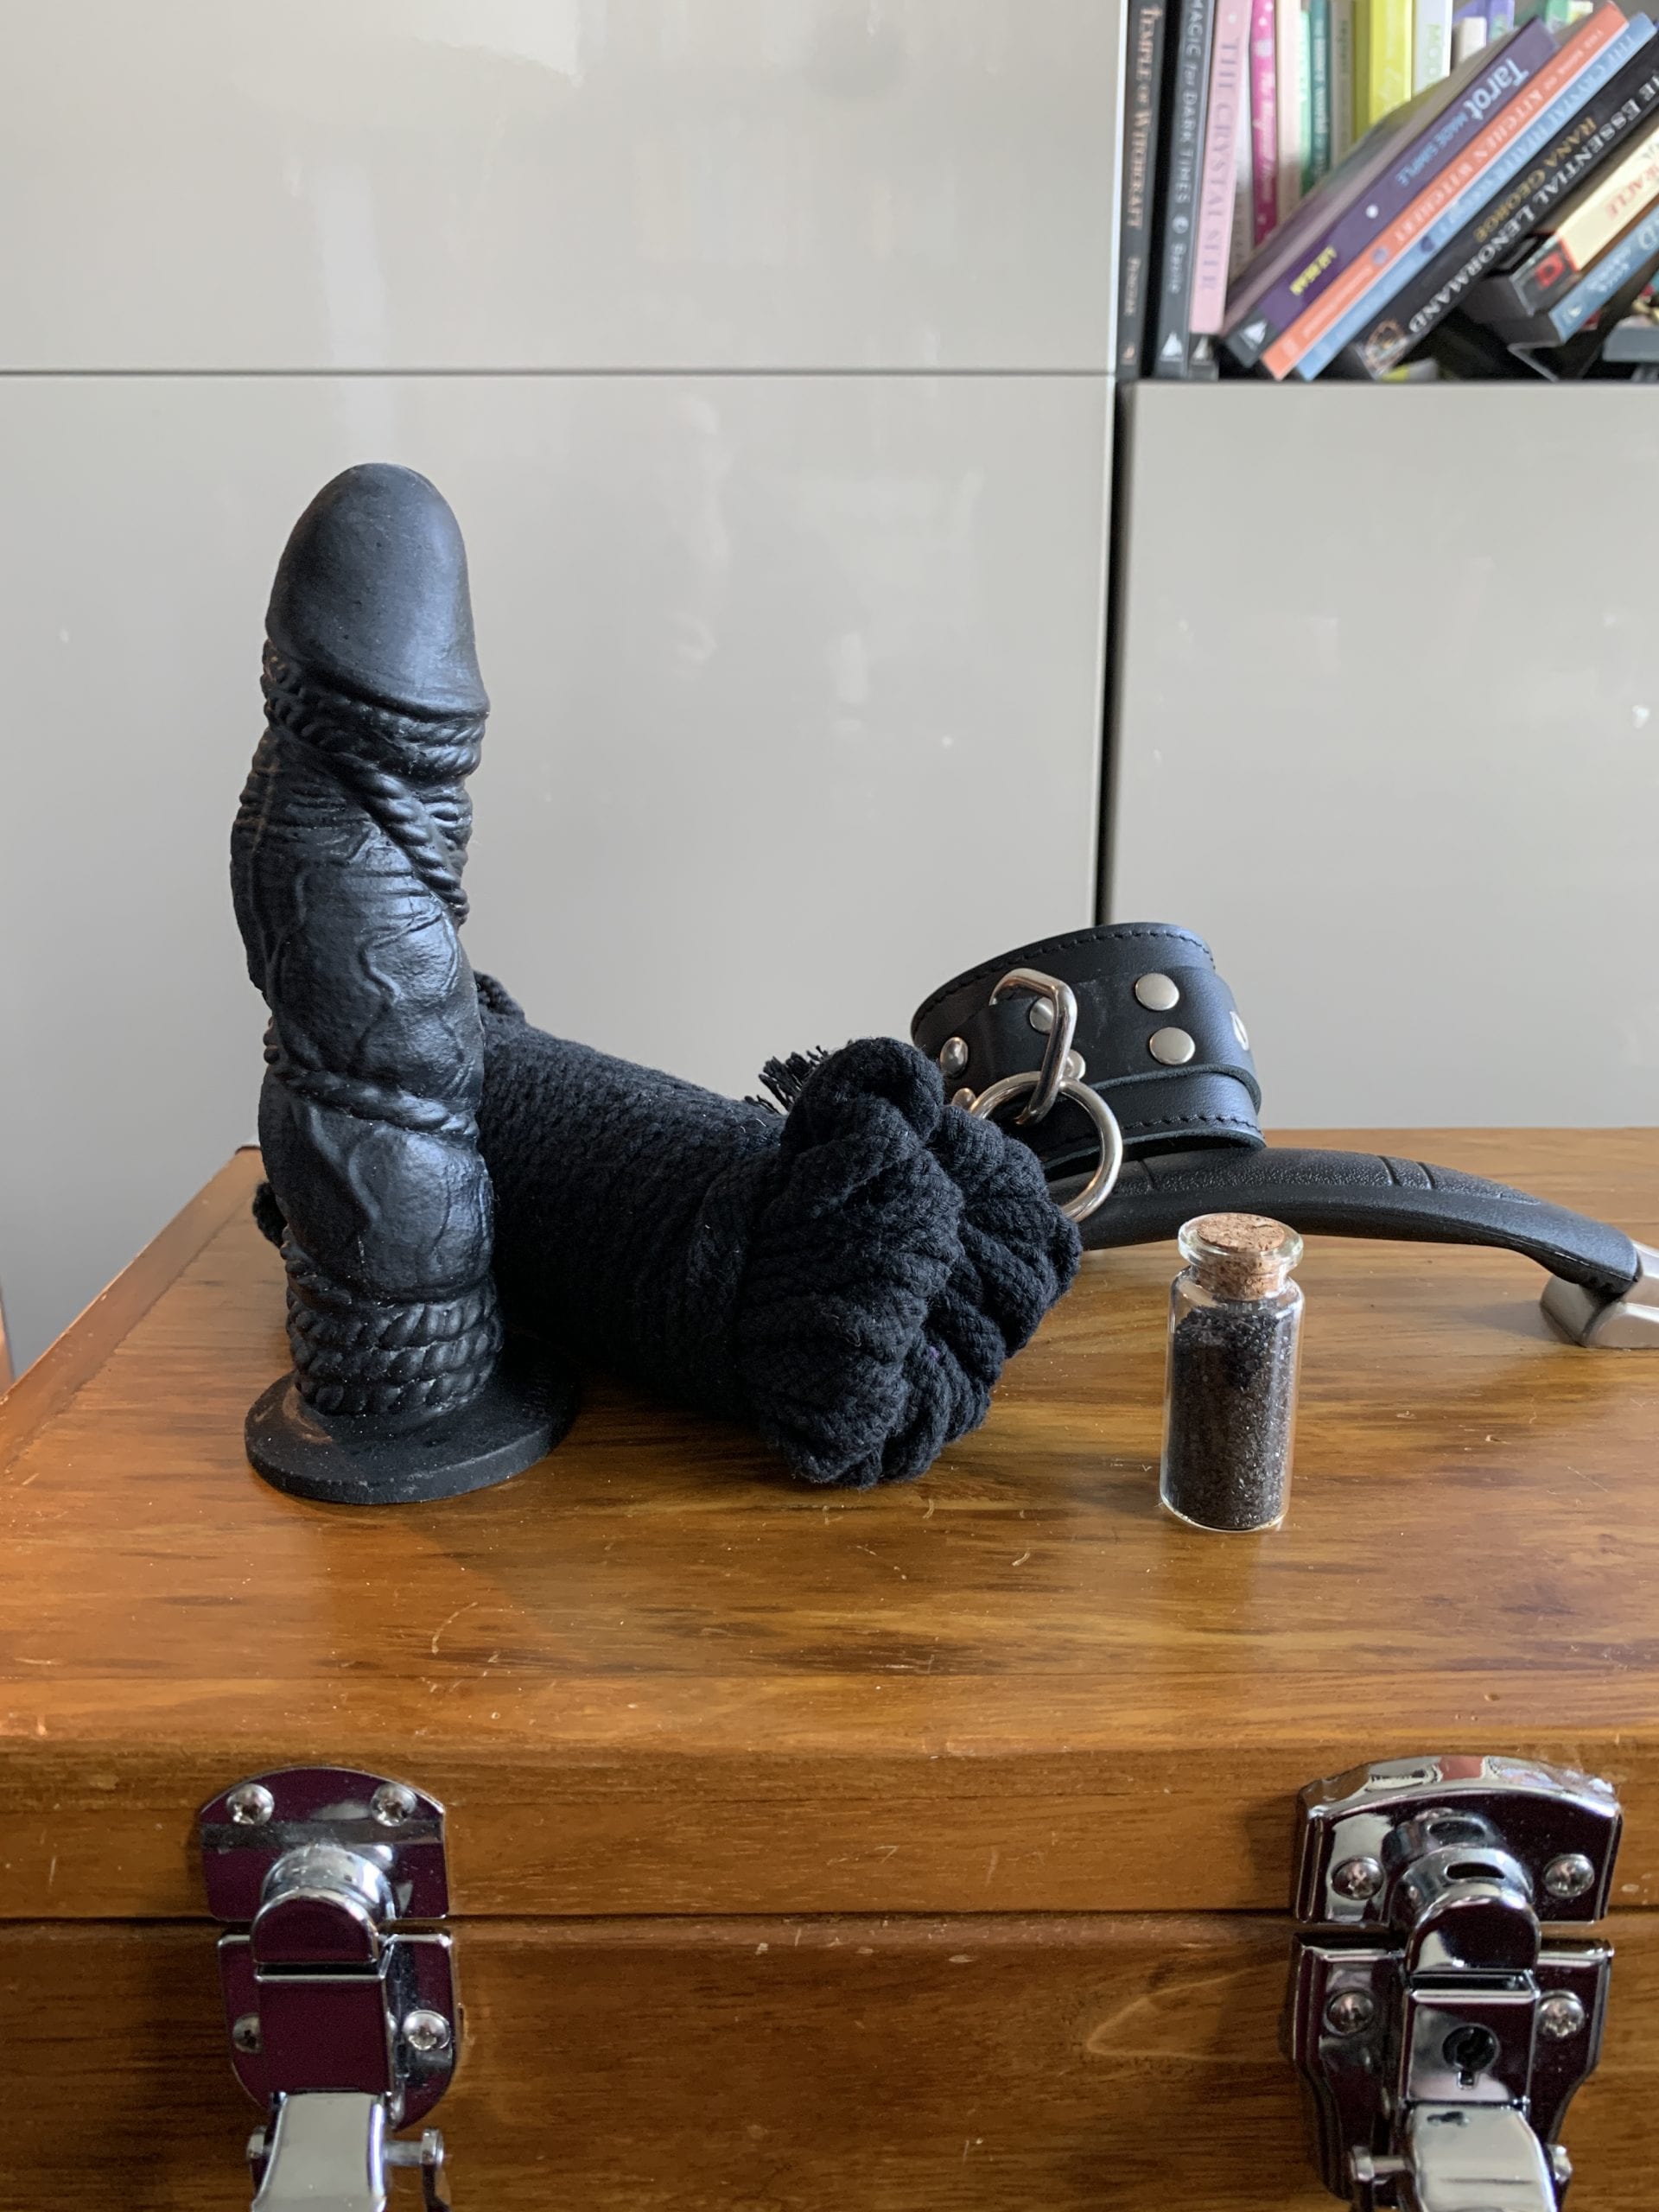 REVIEW: Bound by Tantus